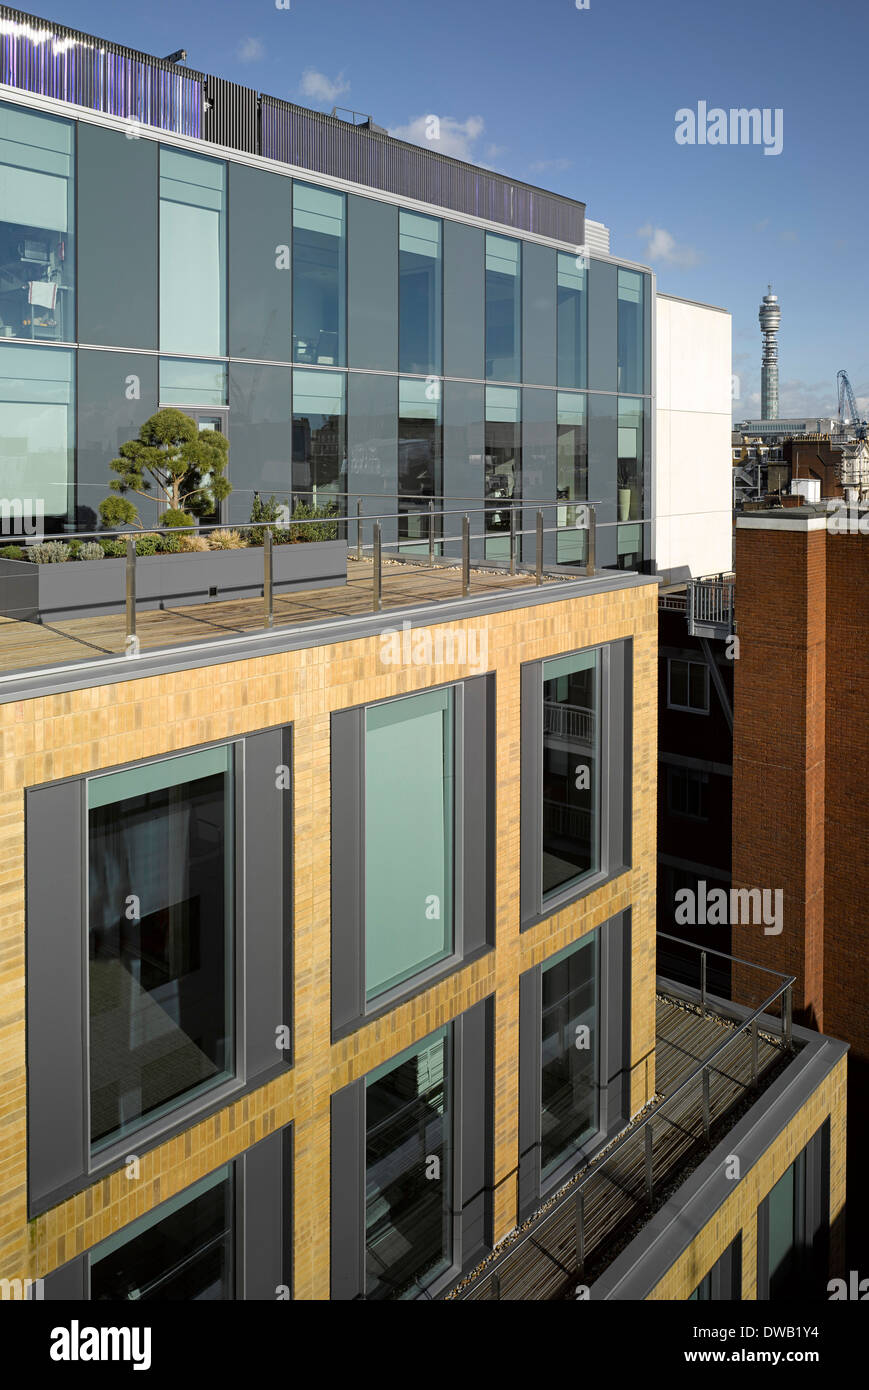 95 WIGMORE STREET, London, United Kingdom. Architect: ORMS Architecture Design, 2013. Exterior View from rooftop. Stock Photo